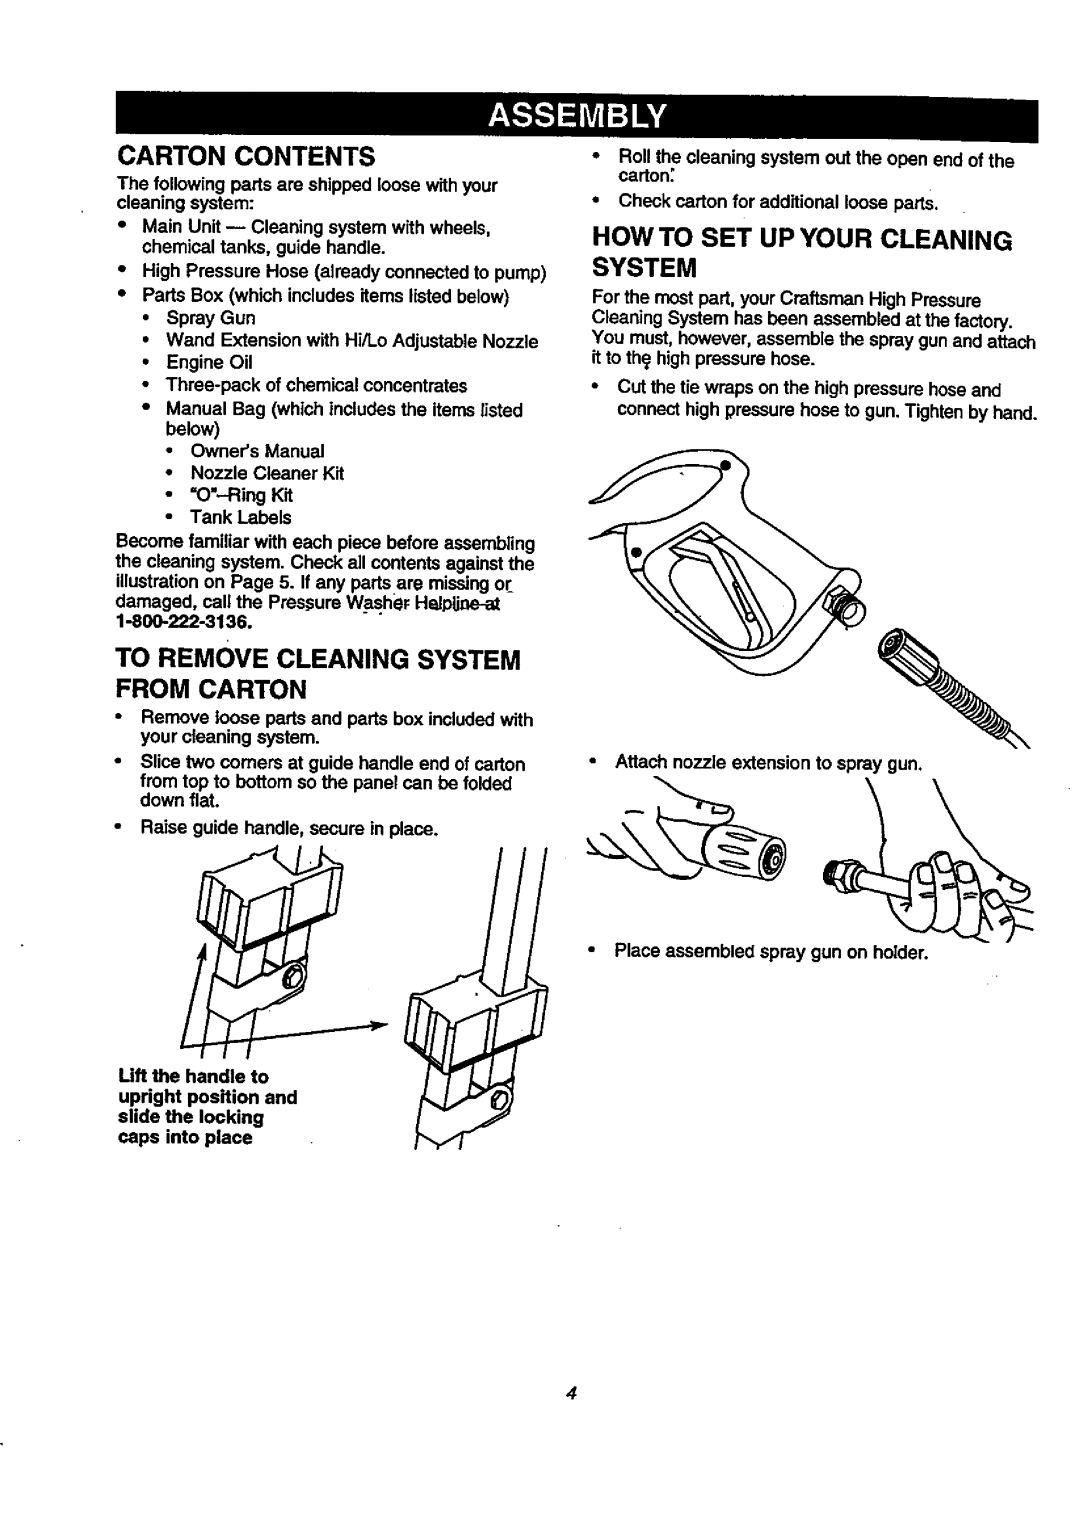 Craftsman 580.76804 manual Carton Contents, To Remove Cleaning System, From Carton, How To Set Up Your Cleaning System 